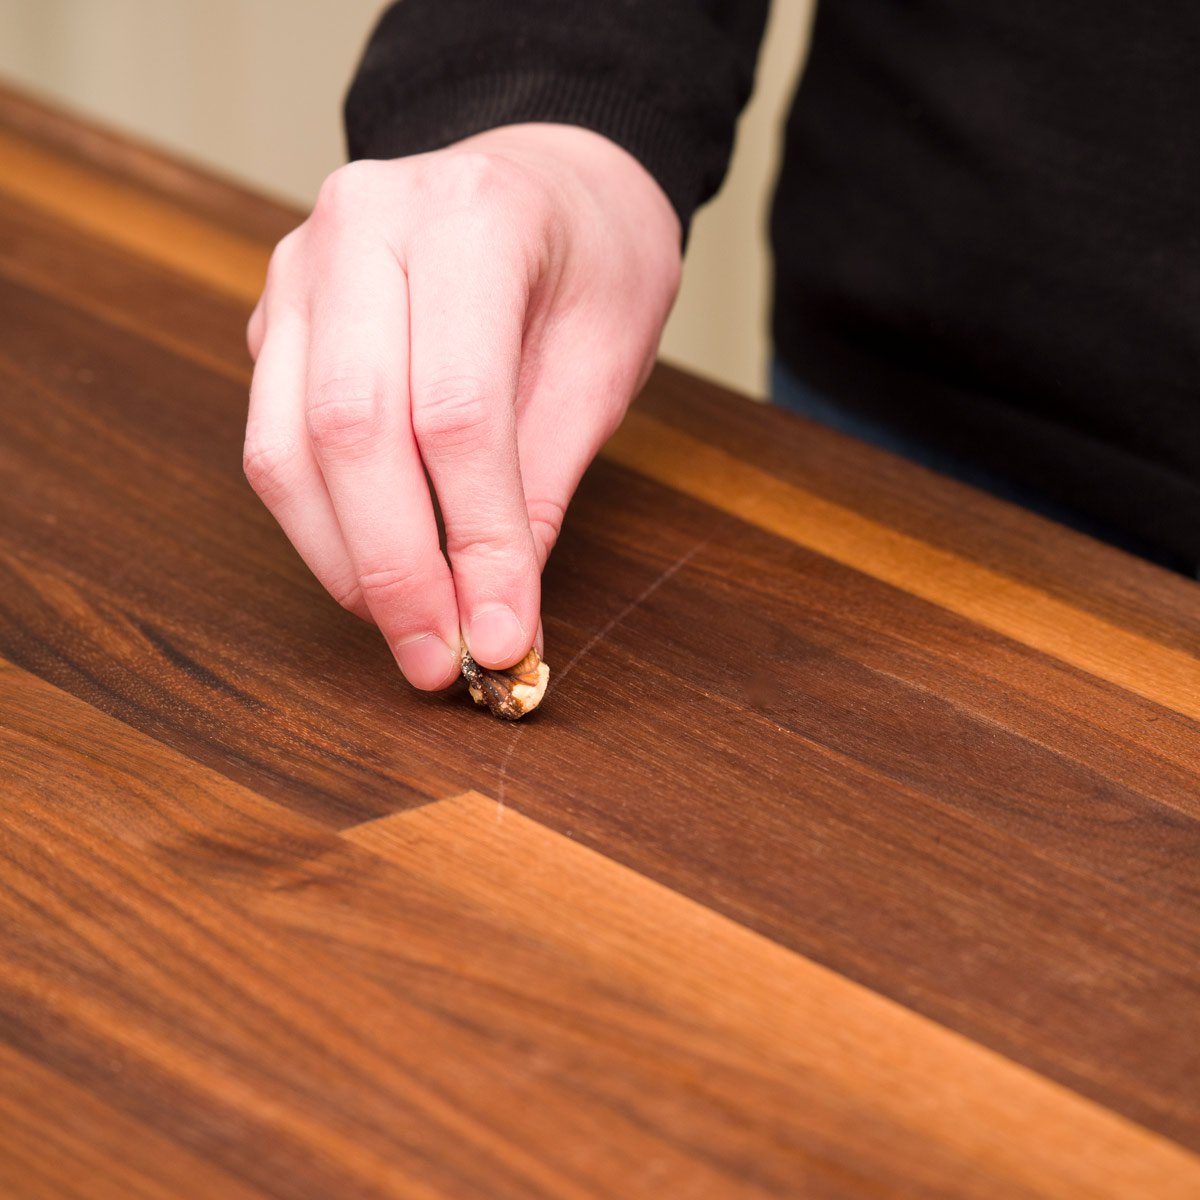 Spring cleaning tips - Walnut fixes scratched wood